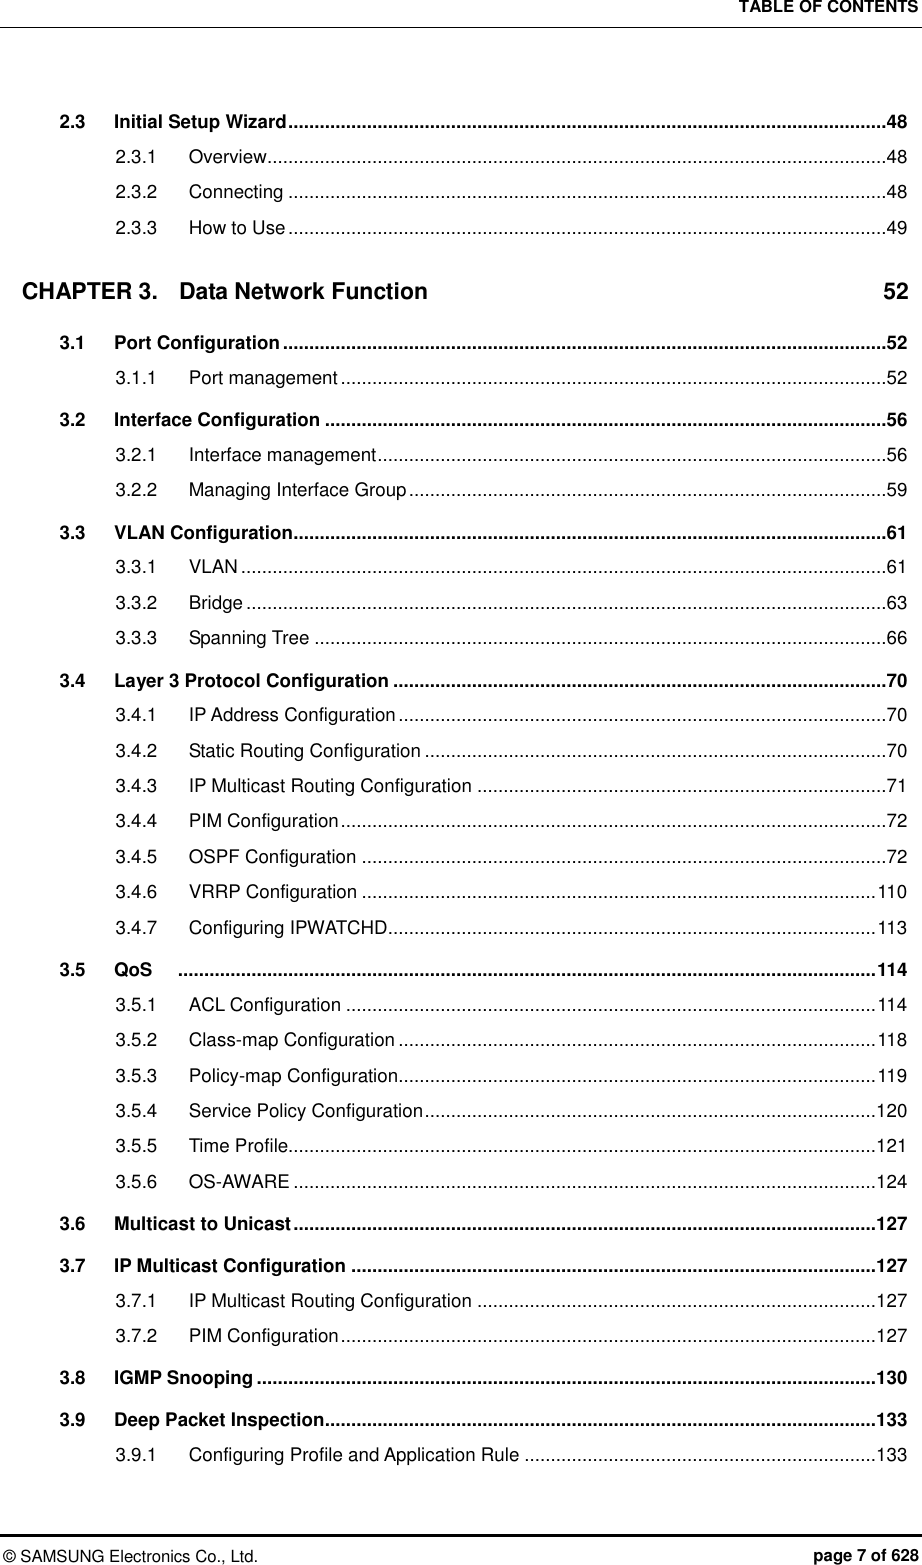 TABLE OF CONTENTS ©  SAMSUNG Electronics Co., Ltd.  page 7 of 628 2.3 Initial Setup Wizard ..................................................................................................................48 2.3.1 Overview......................................................................................................................48 2.3.2 Connecting ..................................................................................................................48 2.3.3 How to Use ..................................................................................................................49 CHAPTER 3. Data Network Function  52 3.1 Port Configuration ...................................................................................................................52 3.1.1 Port management ........................................................................................................52 3.2 Interface Configuration ...........................................................................................................56 3.2.1 Interface management .................................................................................................56 3.2.2 Managing Interface Group ...........................................................................................59 3.3 VLAN Configuration.................................................................................................................61 3.3.1 VLAN ...........................................................................................................................61 3.3.2 Bridge ..........................................................................................................................63 3.3.3 Spanning Tree .............................................................................................................66 3.4 Layer 3 Protocol Configuration ..............................................................................................70 3.4.1 IP Address Configuration .............................................................................................70 3.4.2 Static Routing Configuration ........................................................................................70 3.4.3 IP Multicast Routing Configuration ..............................................................................71 3.4.4 PIM Configuration ........................................................................................................72 3.4.5 OSPF Configuration ....................................................................................................72 3.4.6 VRRP Configuration .................................................................................................. 110 3.4.7 Configuring IPWATCHD............................................................................................. 113 3.5 QoS   ..................................................................................................................................... 114 3.5.1 ACL Configuration ..................................................................................................... 114 3.5.2 Class-map Configuration ........................................................................................... 118 3.5.3 Policy-map Configuration........................................................................................... 119 3.5.4 Service Policy Configuration ......................................................................................120 3.5.5 Time Profile................................................................................................................121 3.5.6 OS-AWARE ...............................................................................................................124 3.6 Multicast to Unicast ...............................................................................................................127 3.7 IP Multicast Configuration ....................................................................................................127 3.7.1 IP Multicast Routing Configuration ............................................................................127 3.7.2 PIM Configuration ......................................................................................................127 3.8 IGMP Snooping ......................................................................................................................130 3.9 Deep Packet Inspection .........................................................................................................133 3.9.1 Configuring Profile and Application Rule ...................................................................133 